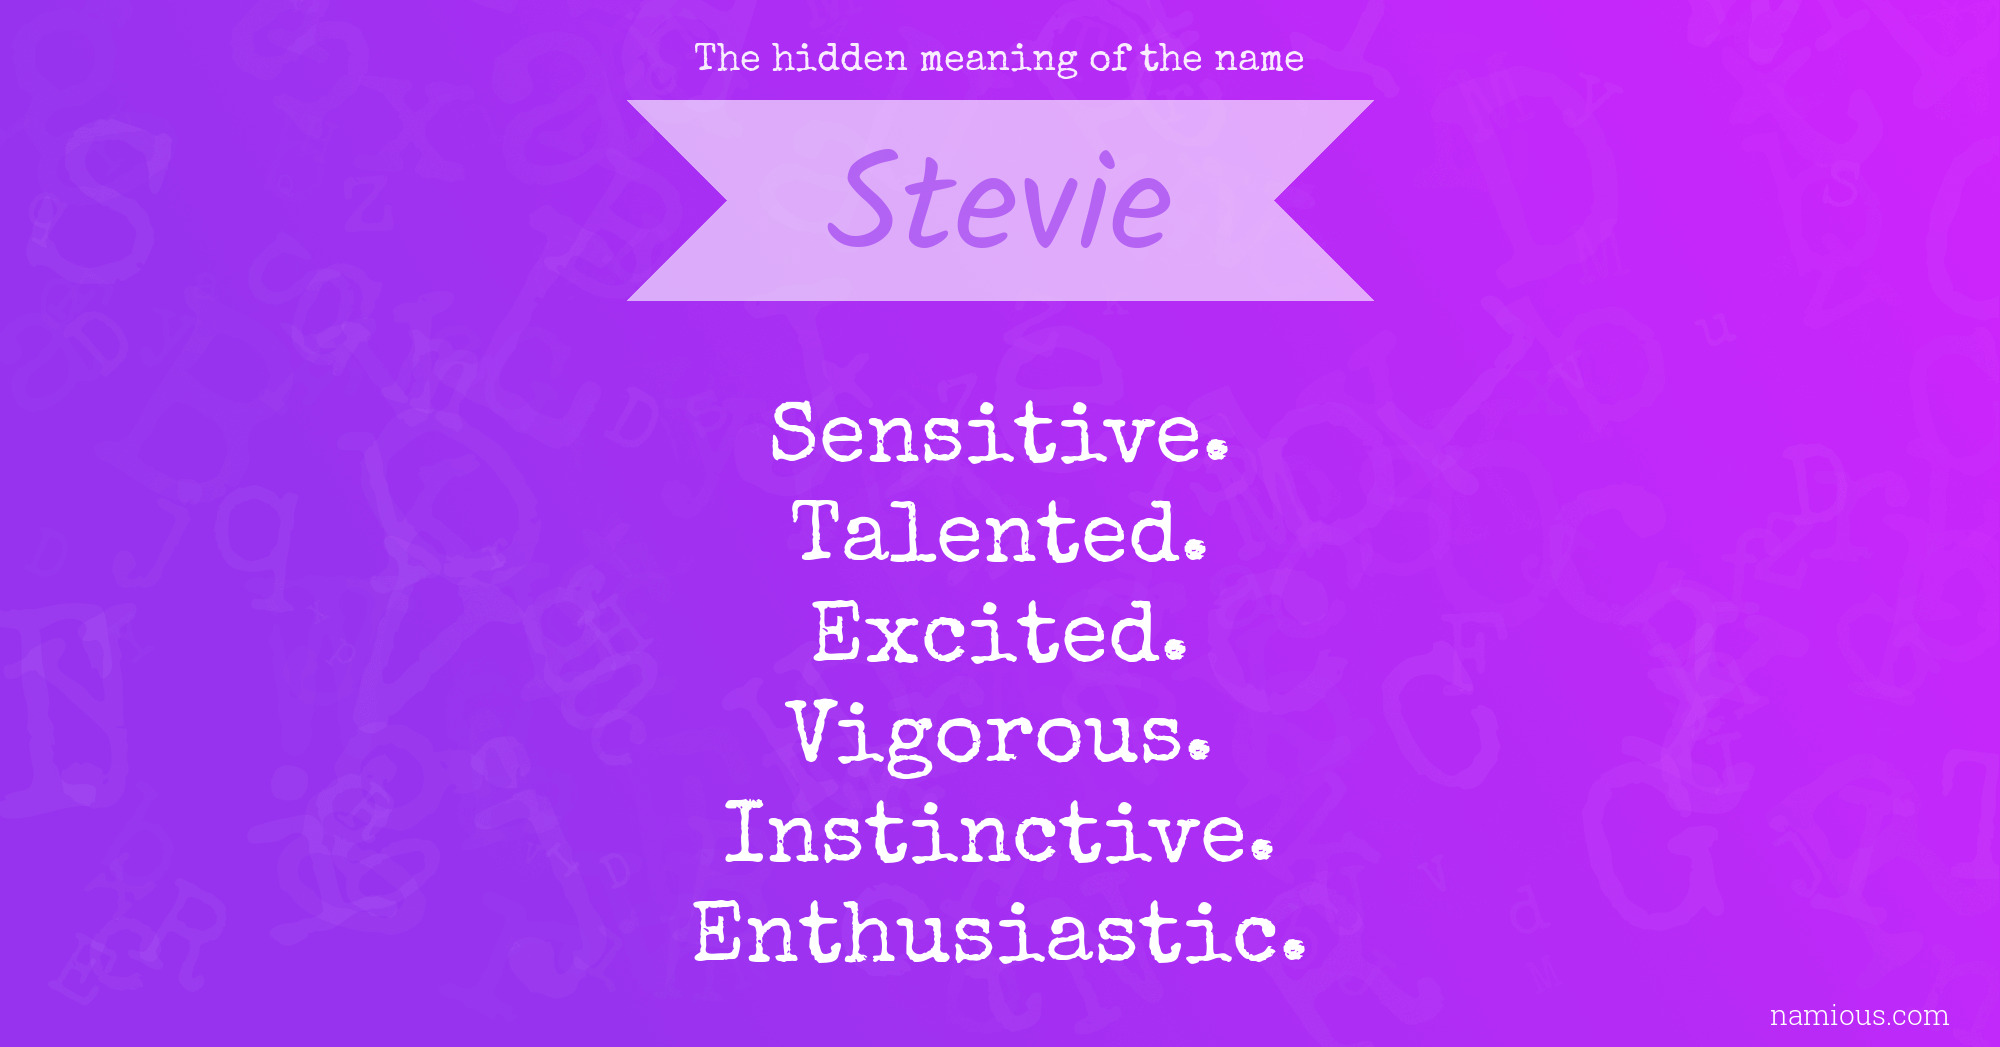 The hidden meaning of the name Stevie